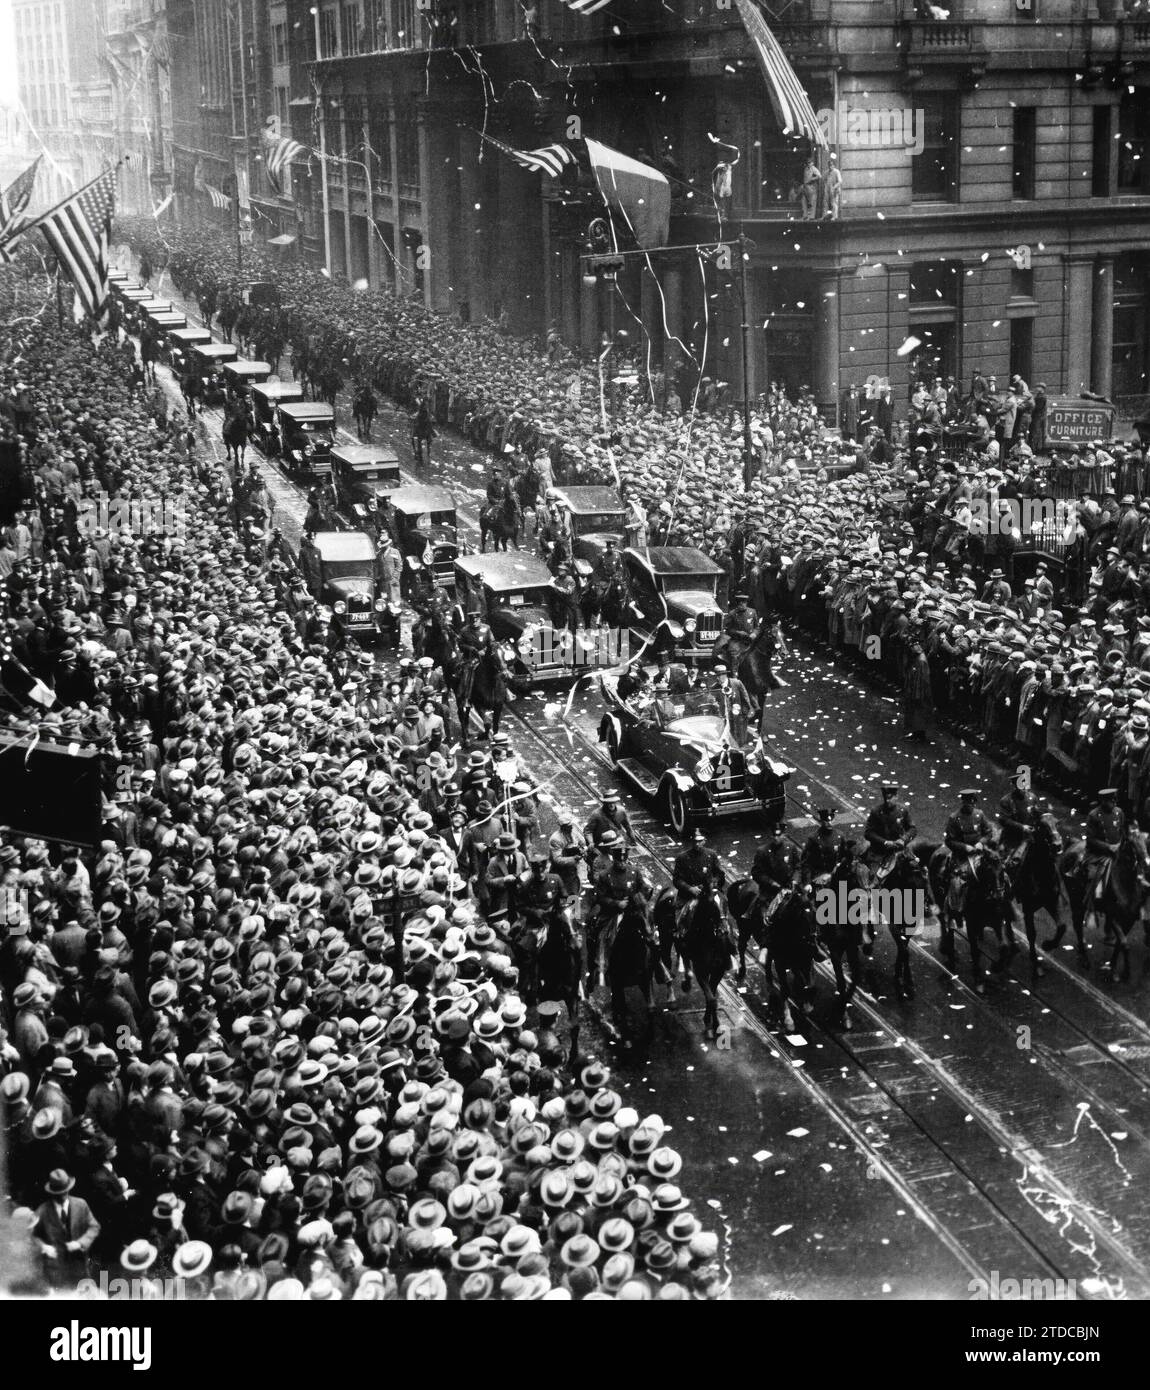 09/30/1926. NY. The journey of the Queen of Romania. Reception given by the people of New York to Queen Mary and her Children, Princess Ileana and Prince Nicolas. Credit: Album / Archivo ABC / Vidal Stock Photo